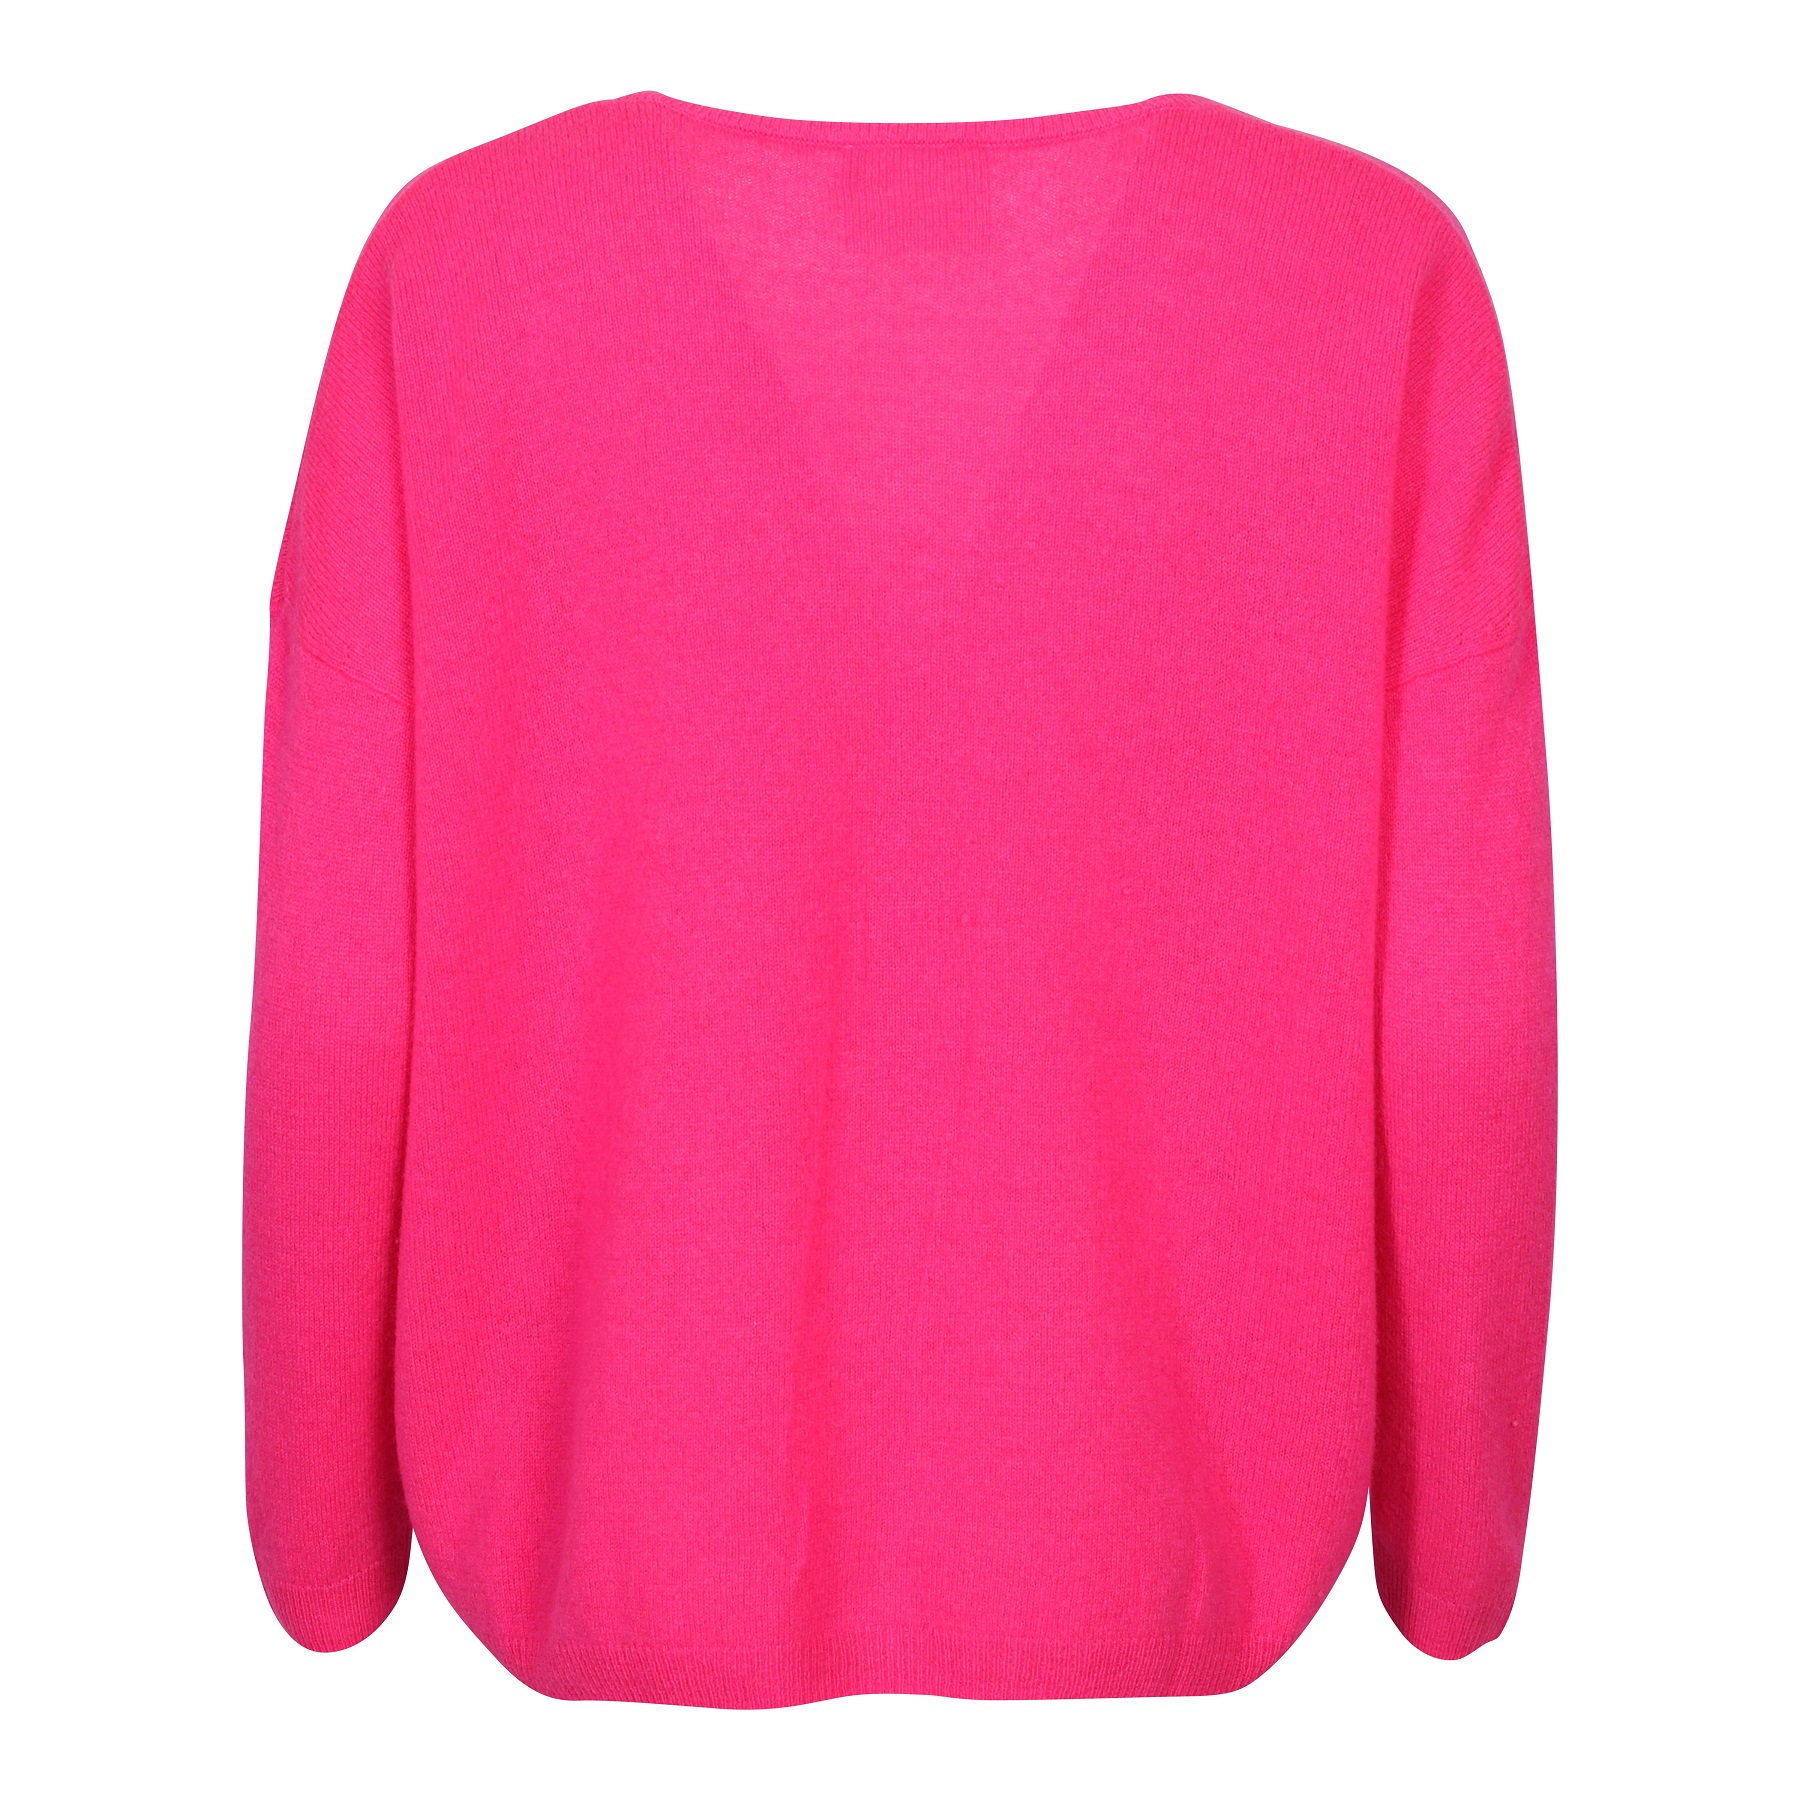 Absolut Cashmere Pullover Angele in Pink S